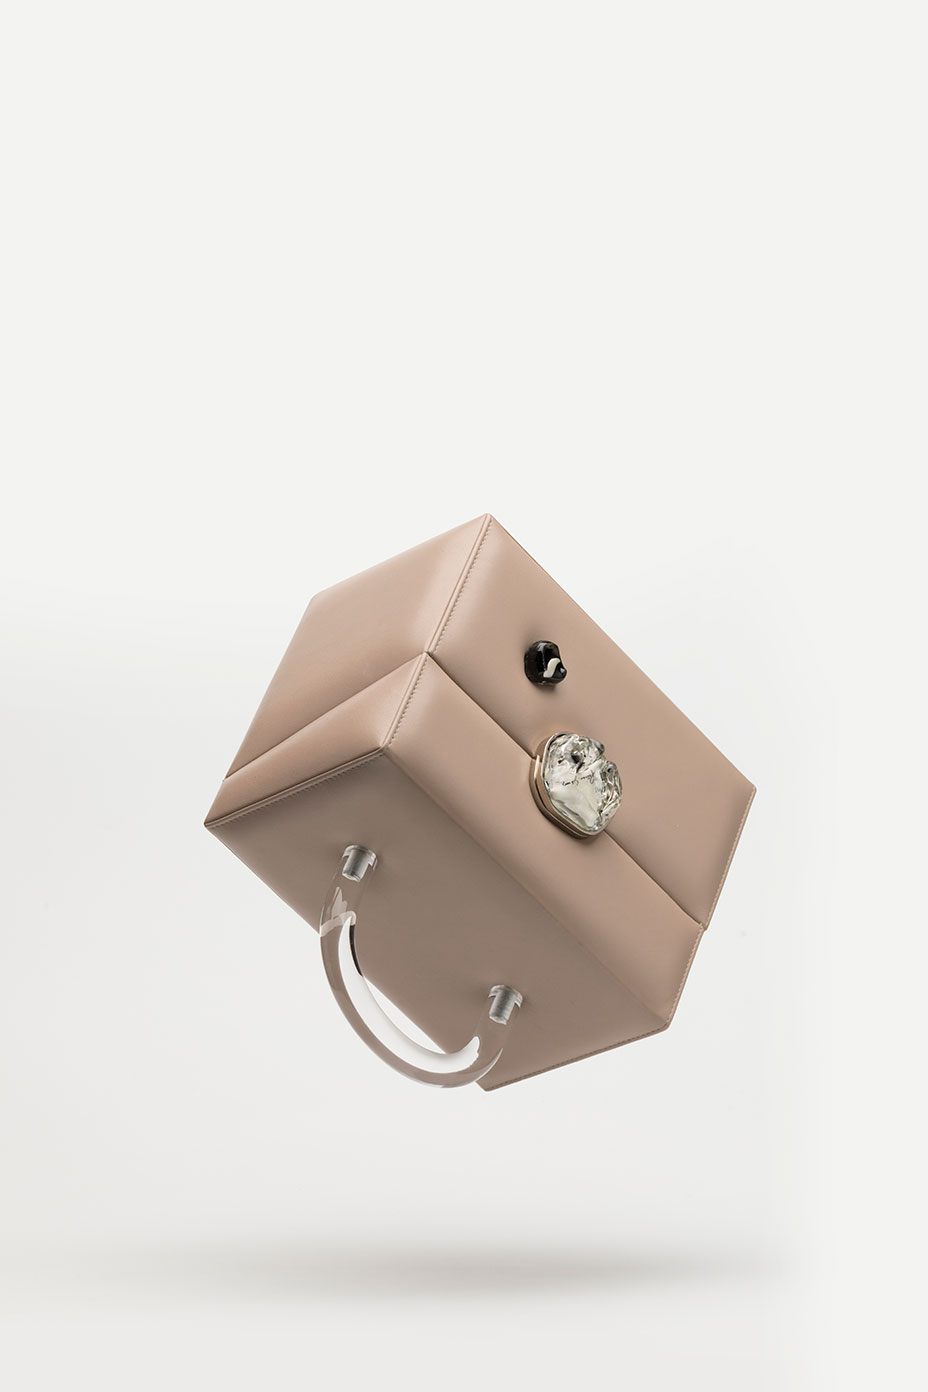 The Box bag in beige leather is turned and is floating in the air on a white background